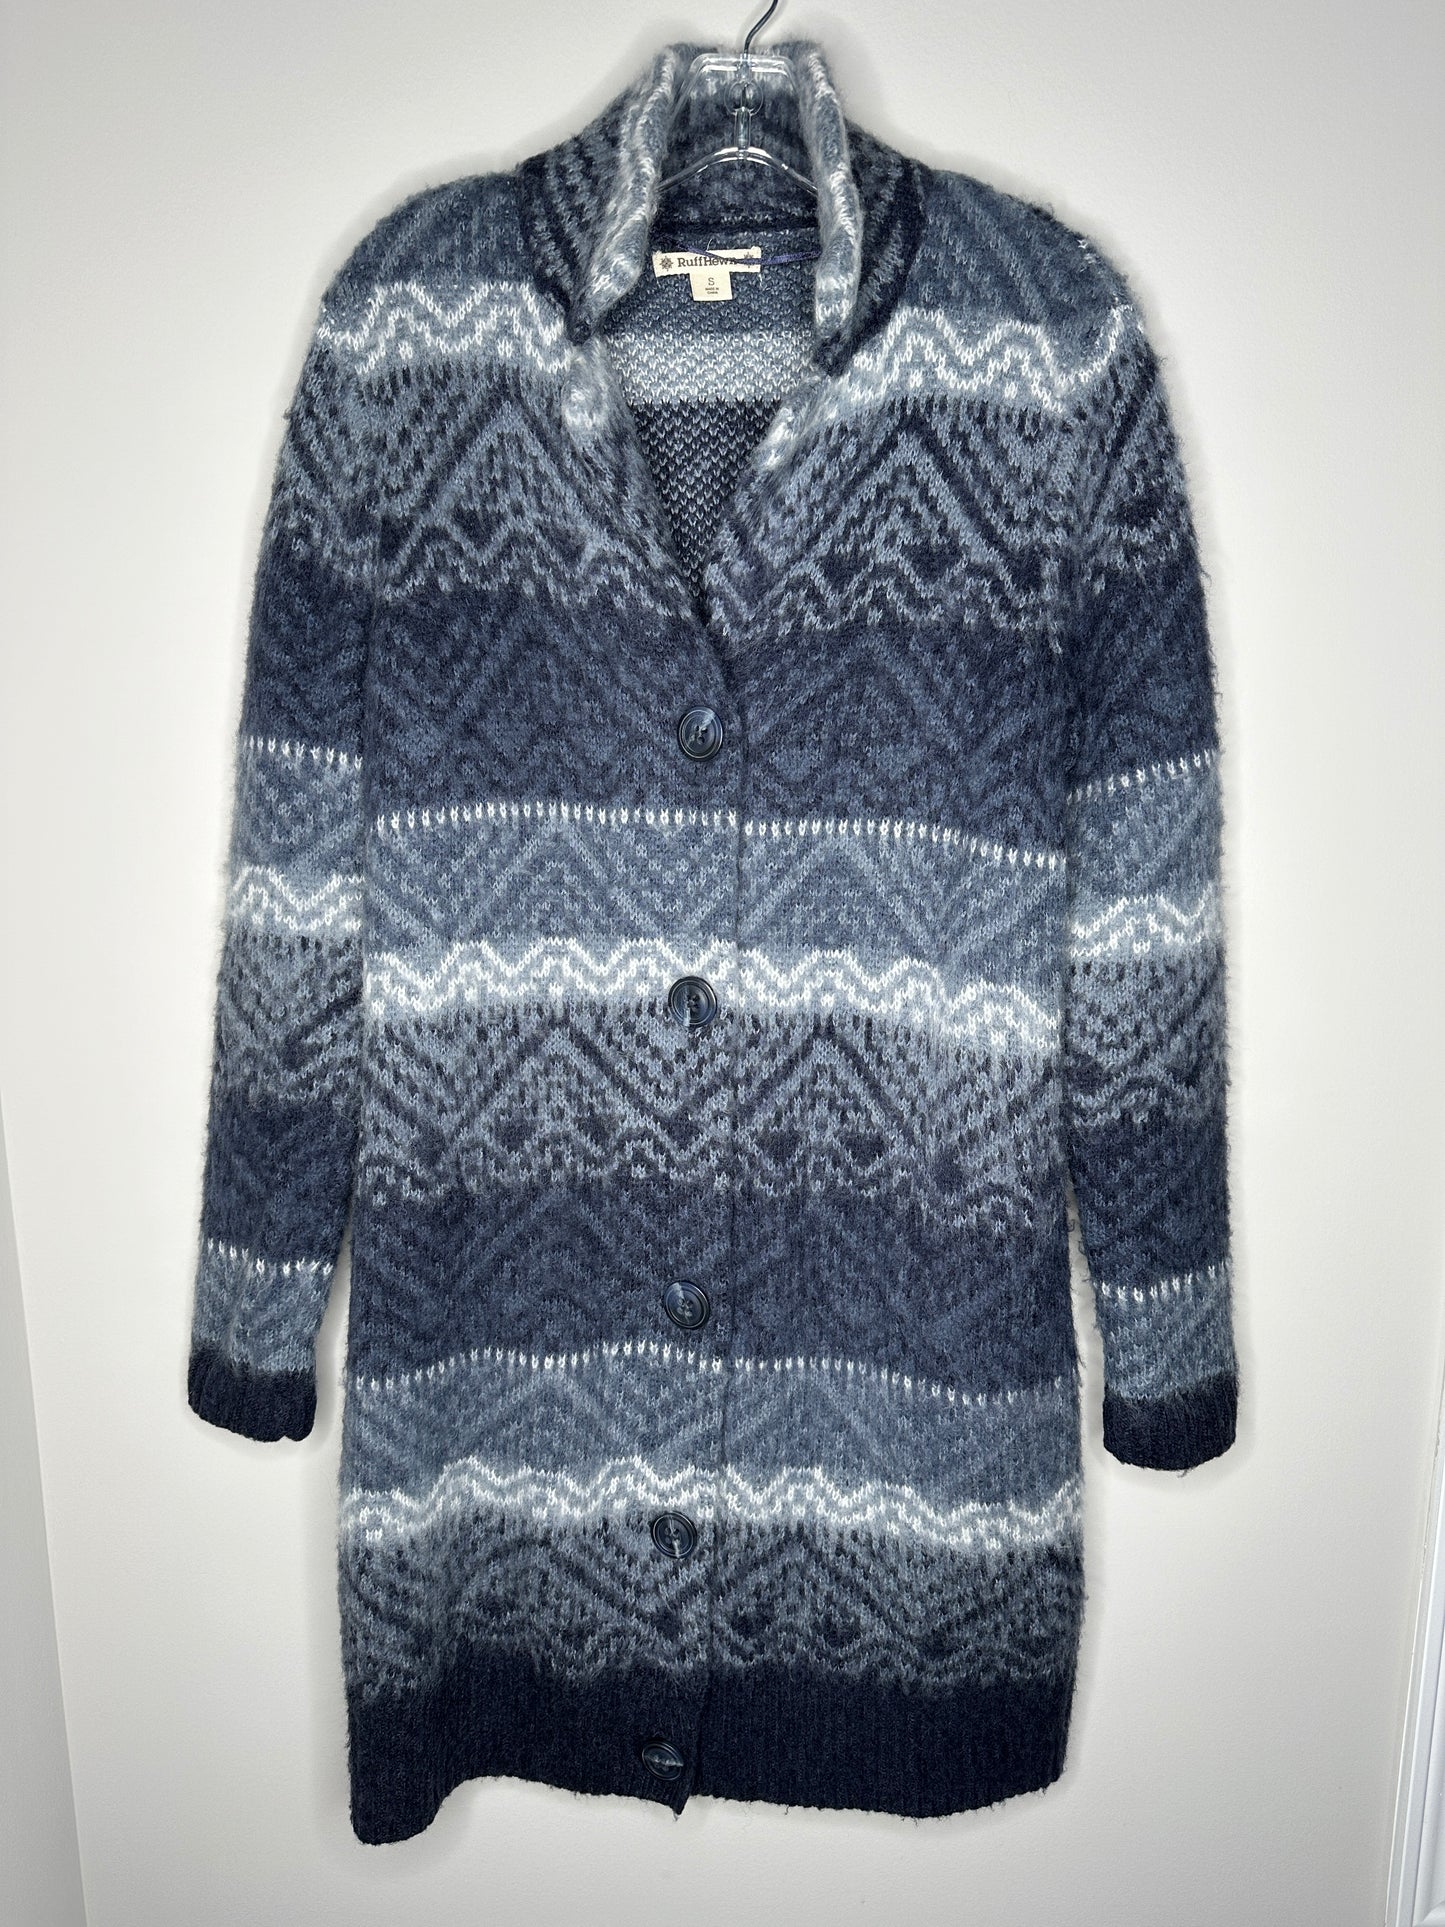 Ruff Hewn Size S Blue Patterned Fair Isle Long Buttoned Cardigan